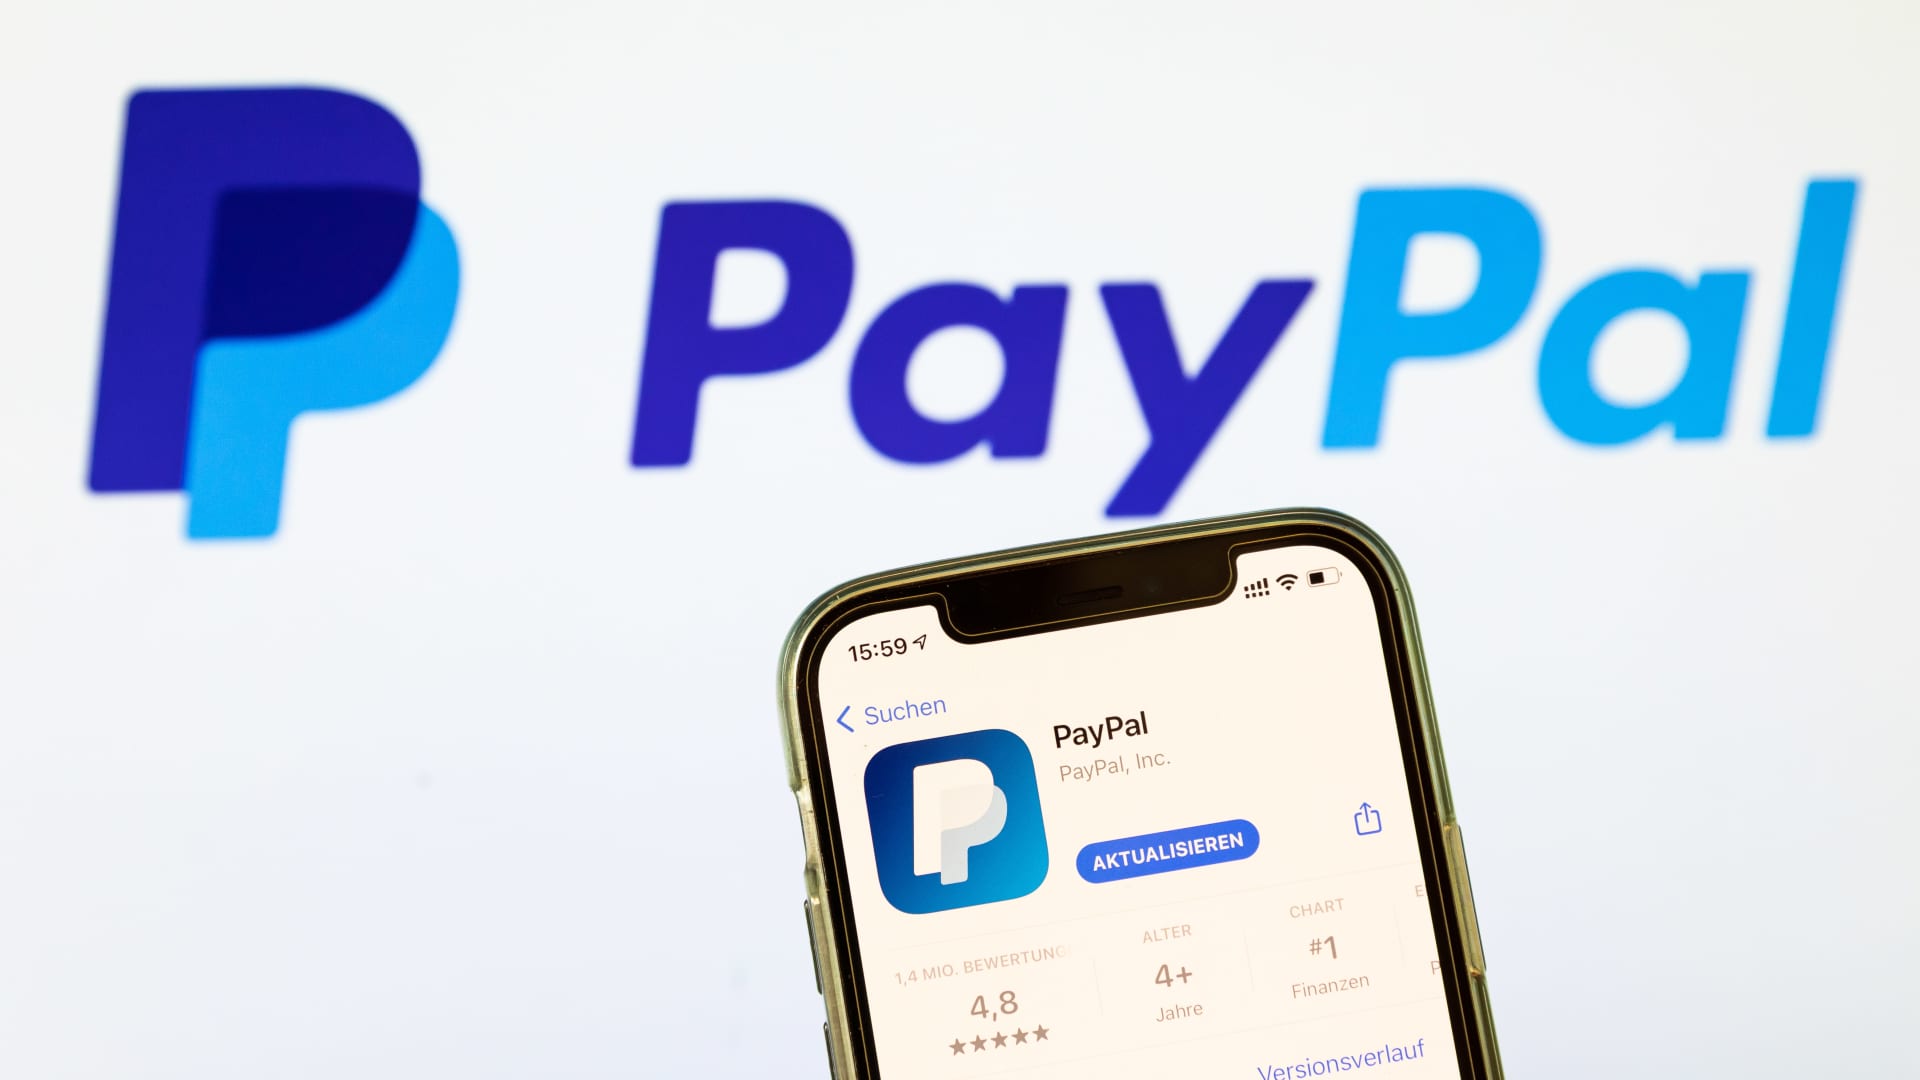 The PayPal app shown on an iPhone.